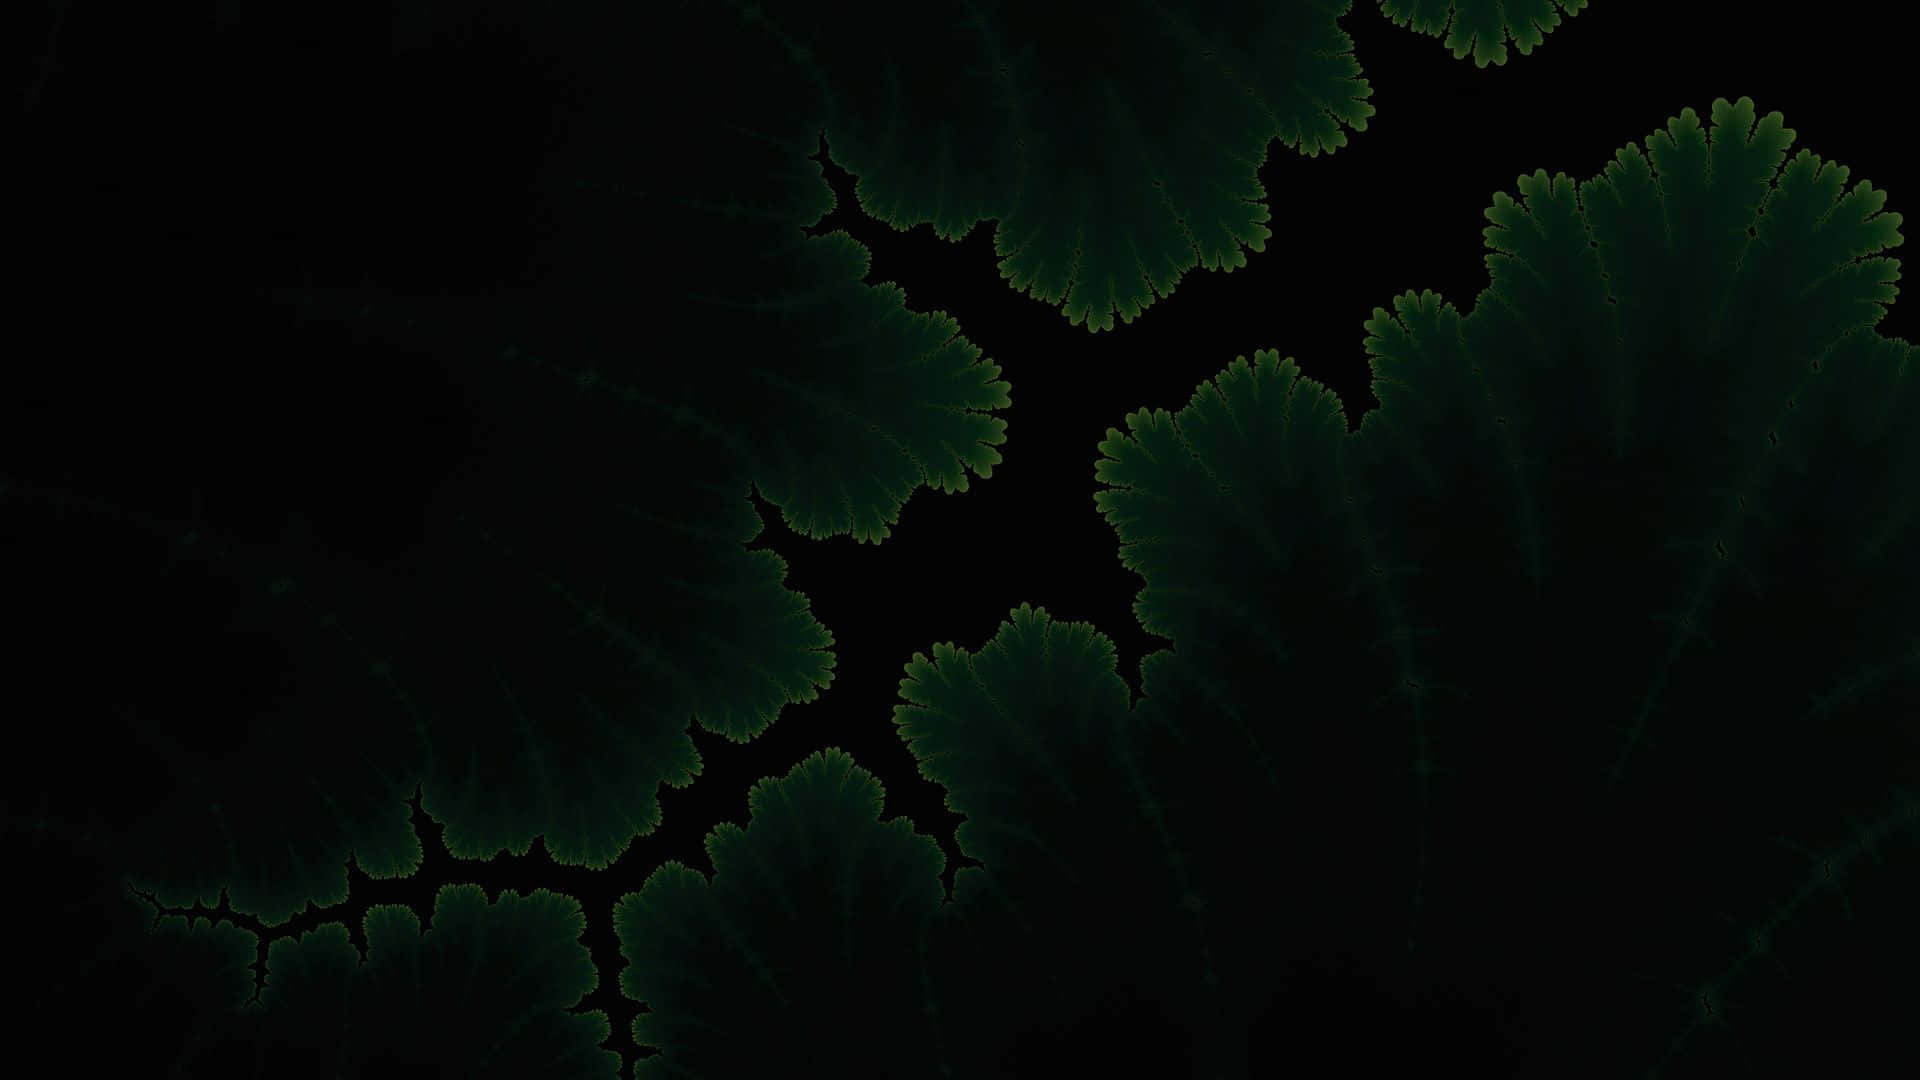 You deserve an Amoled experience with this 1080P background.